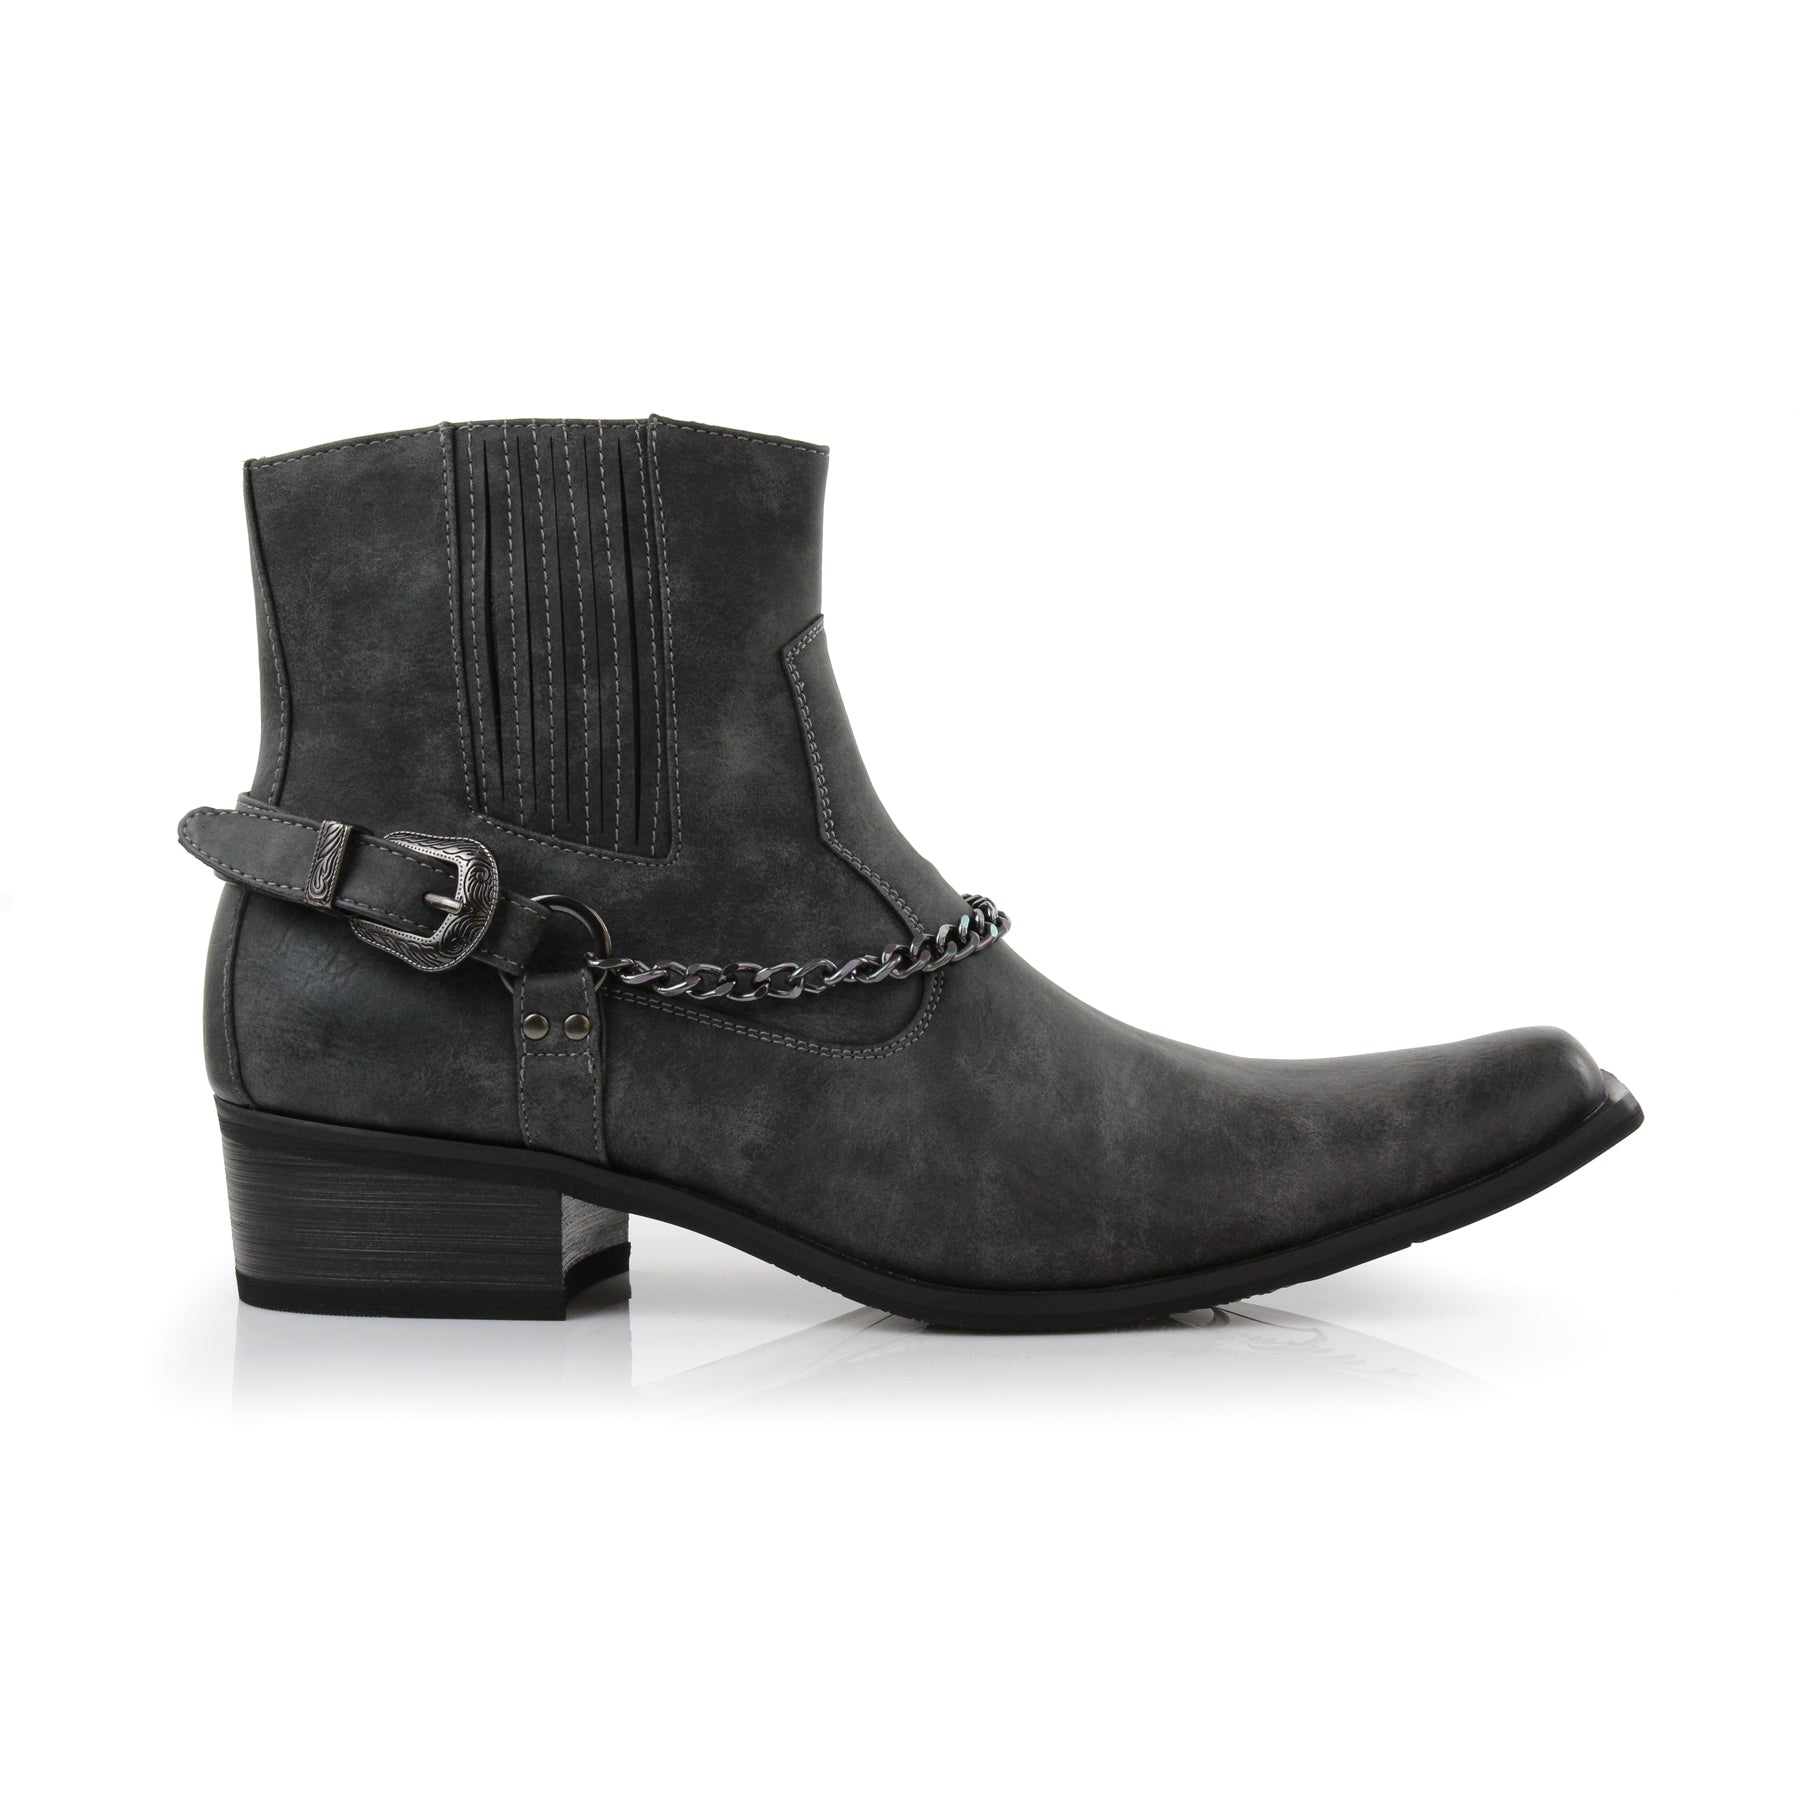 Faux Leather Cowboy Boots | Reyes by Ferro Aldo | Conal Footwear | Outer Side Angle View